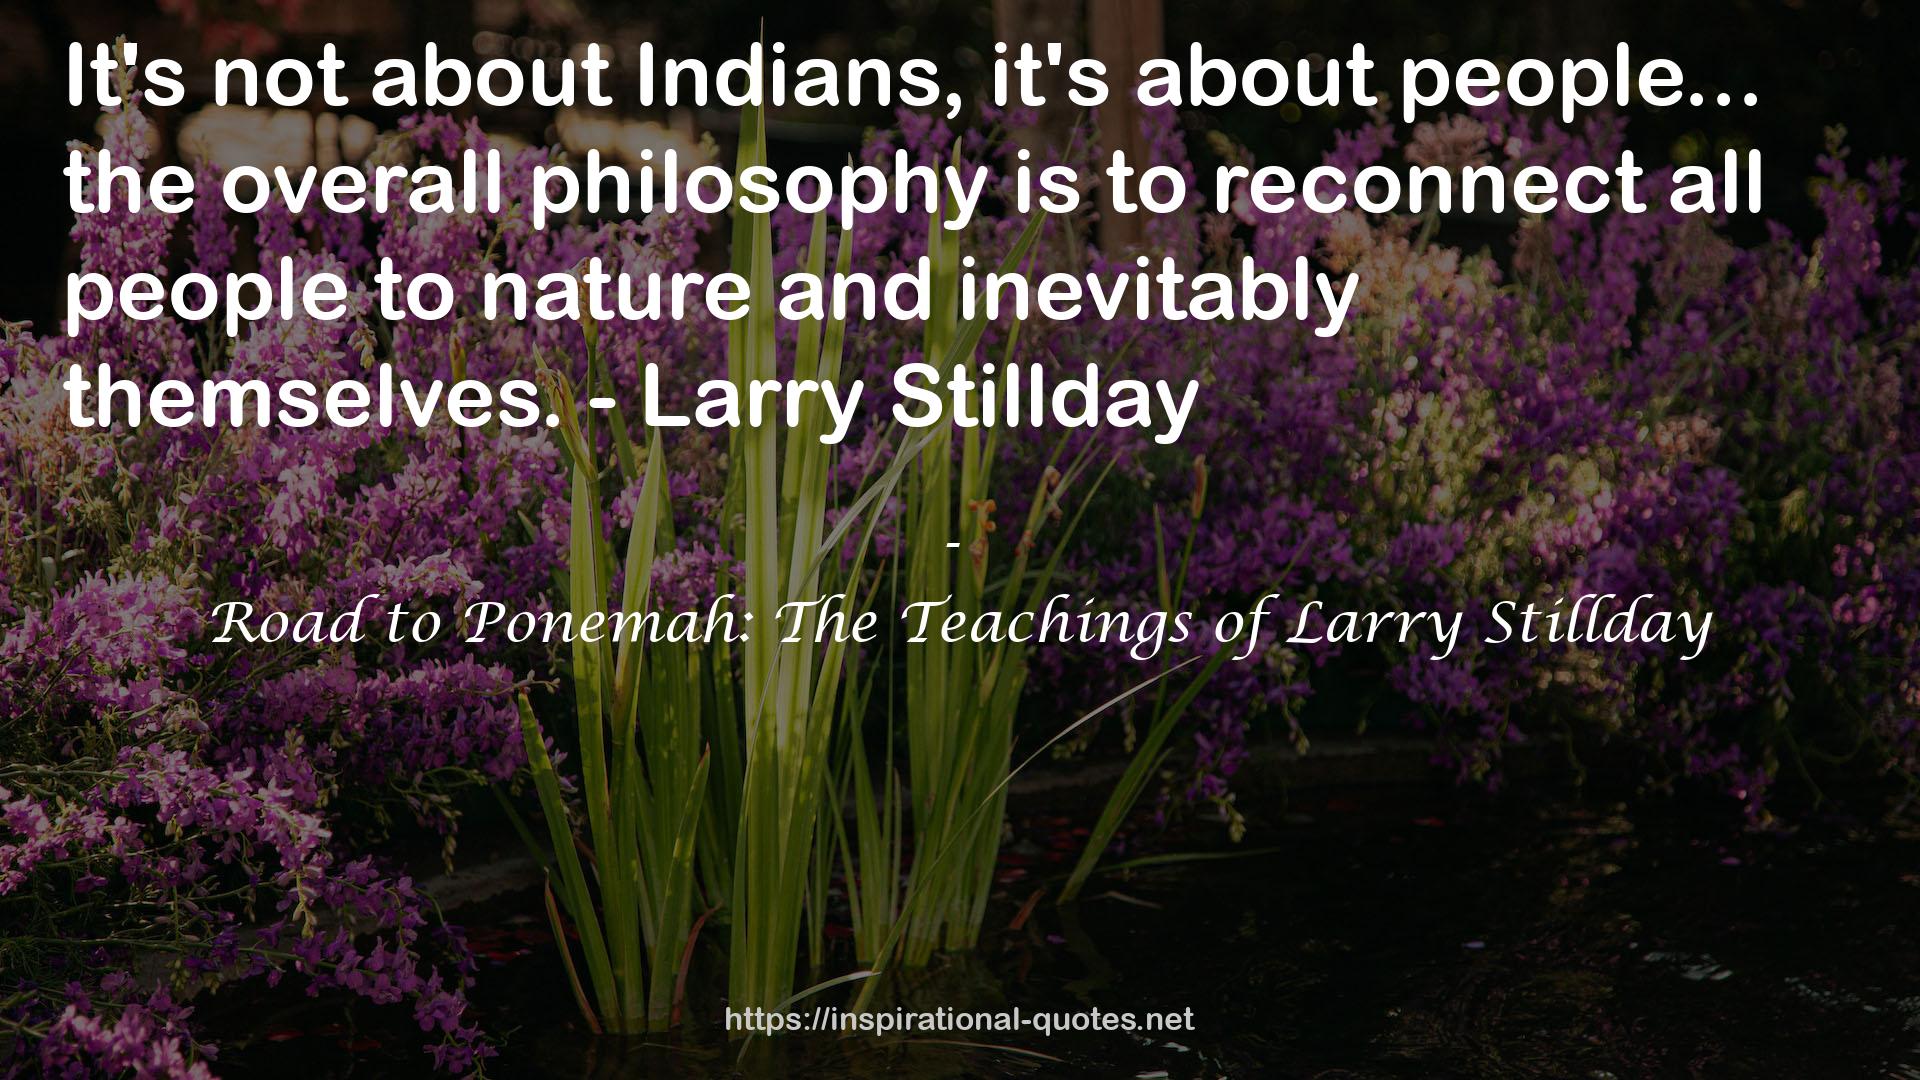 Road to Ponemah: The Teachings of Larry Stillday QUOTES